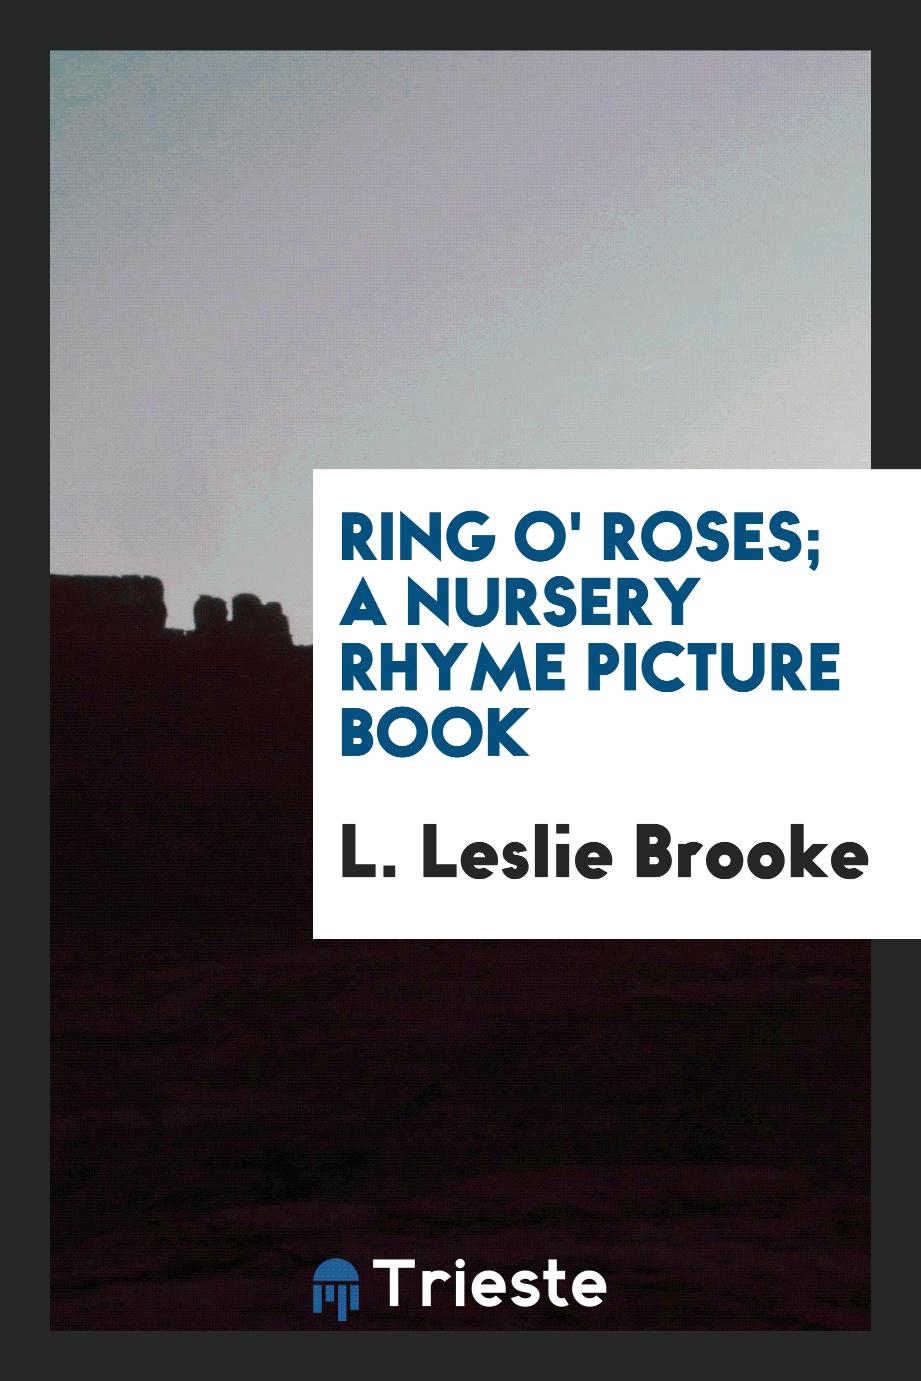 Ring o' roses; a nursery rhyme picture book